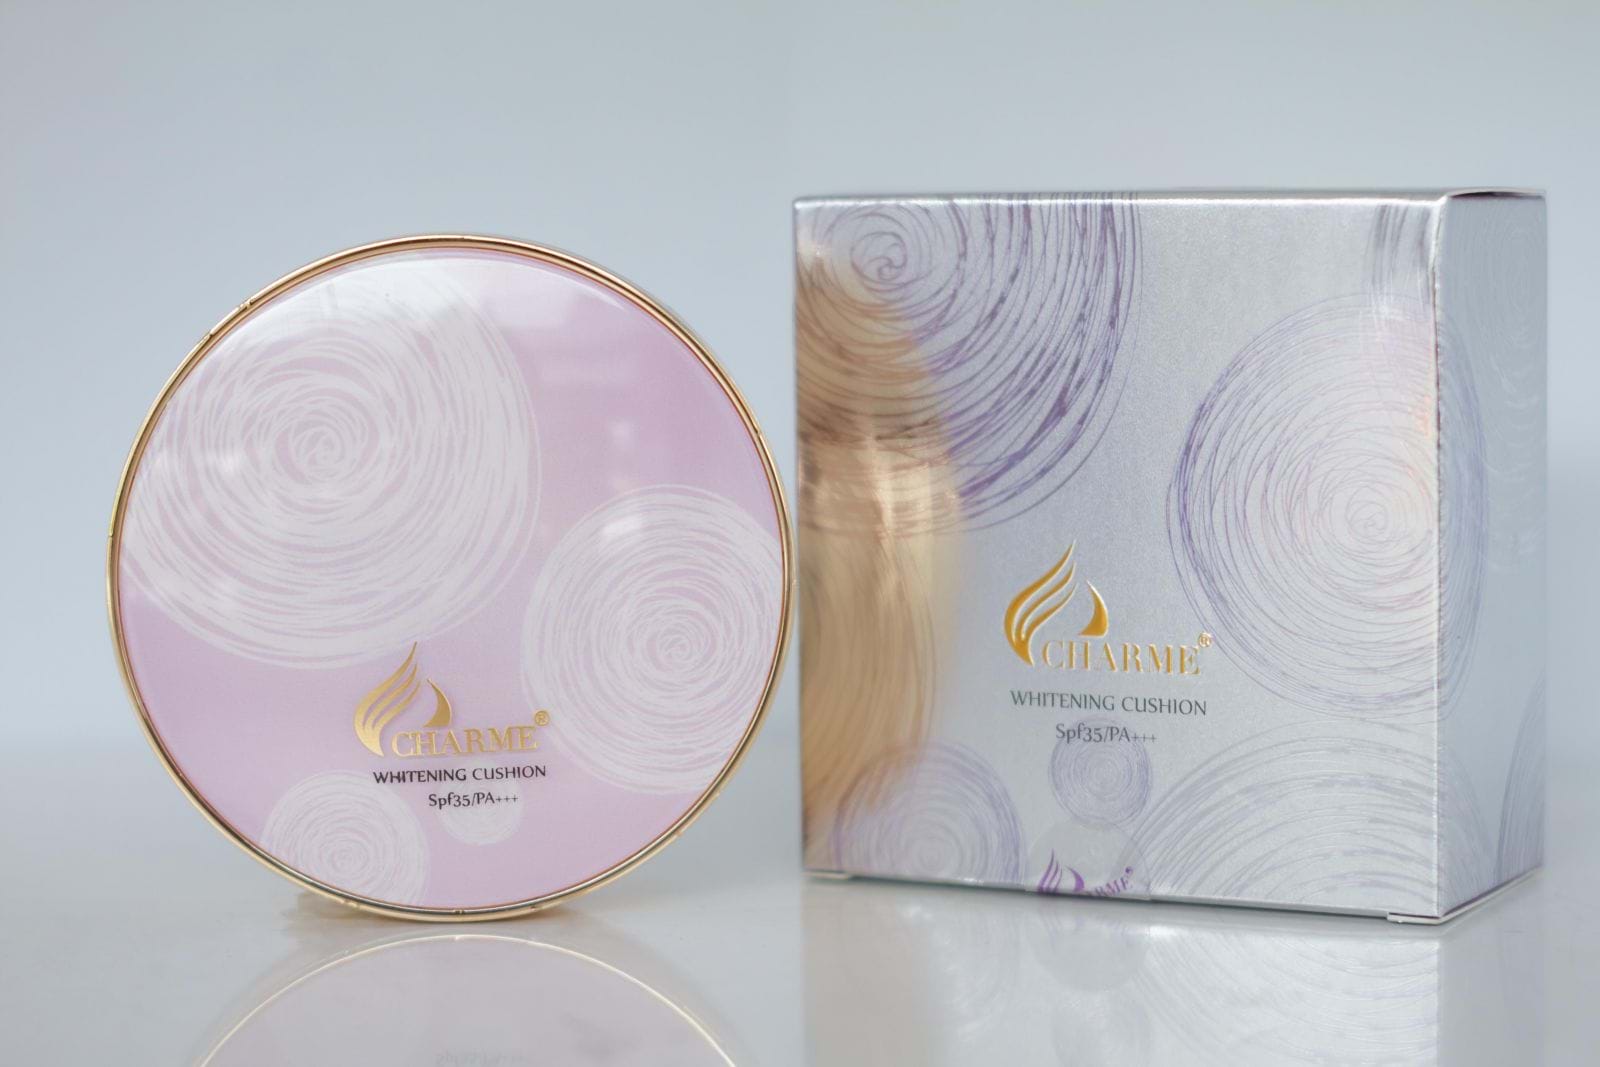 REVIEW Charme Whitening Cushion